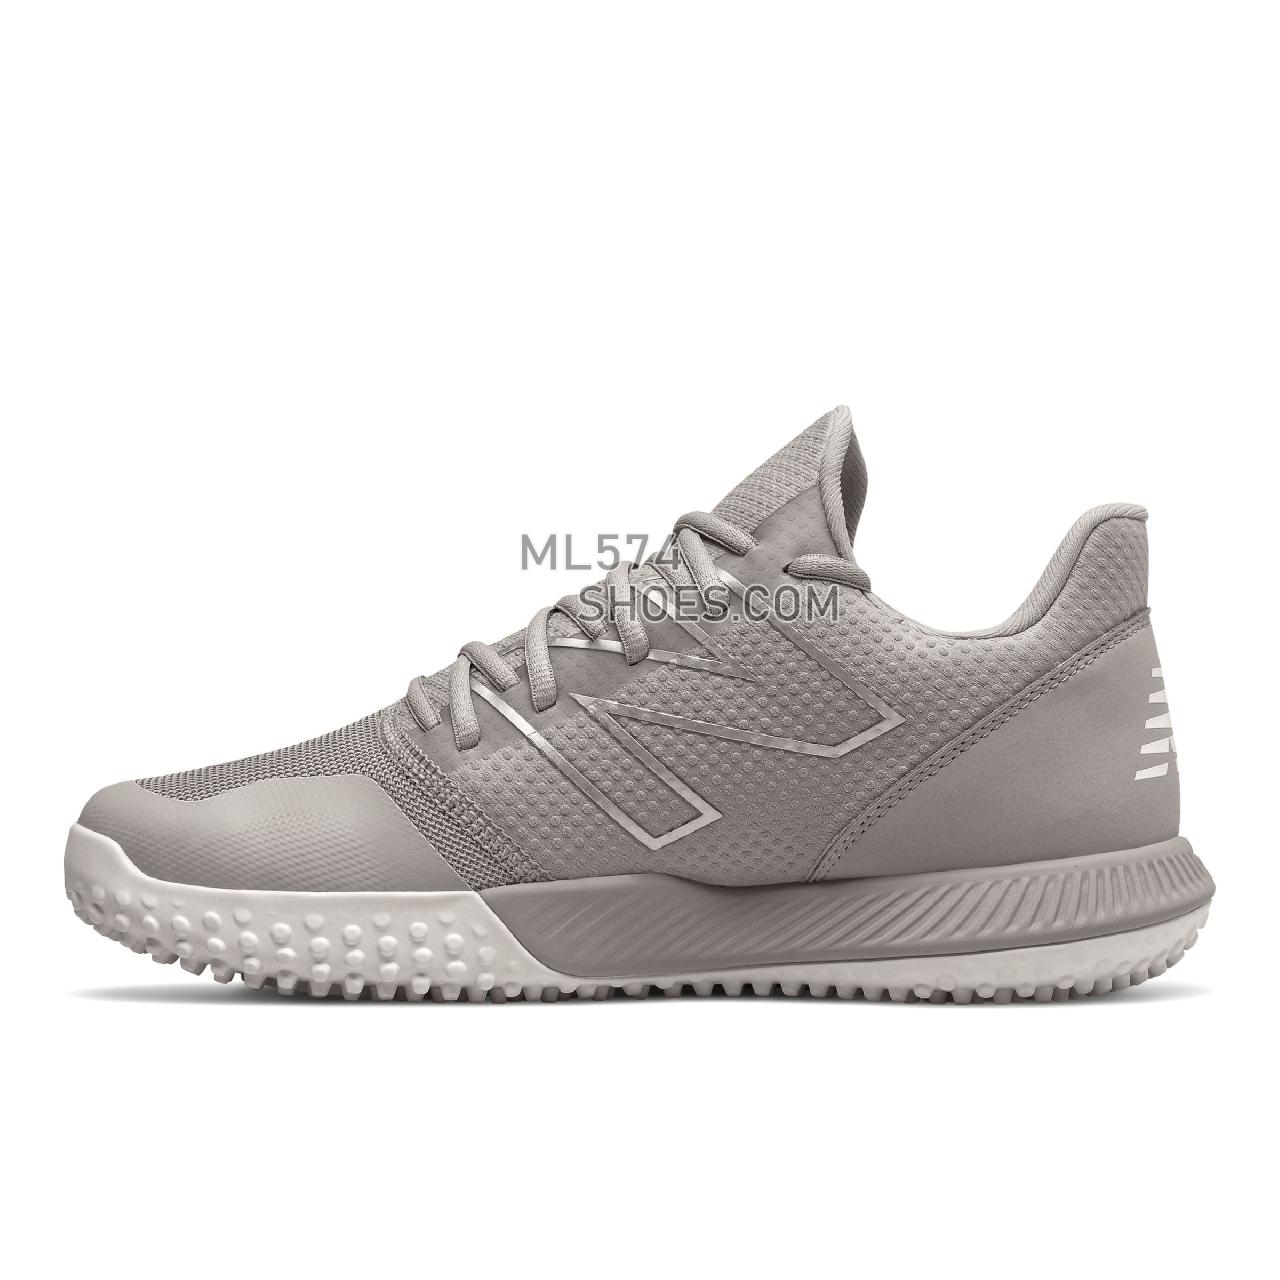 New Balance FuelCell 4040 v6 Turf Trainer - Men's Baseball Turf - Grey with White - T4040TG6